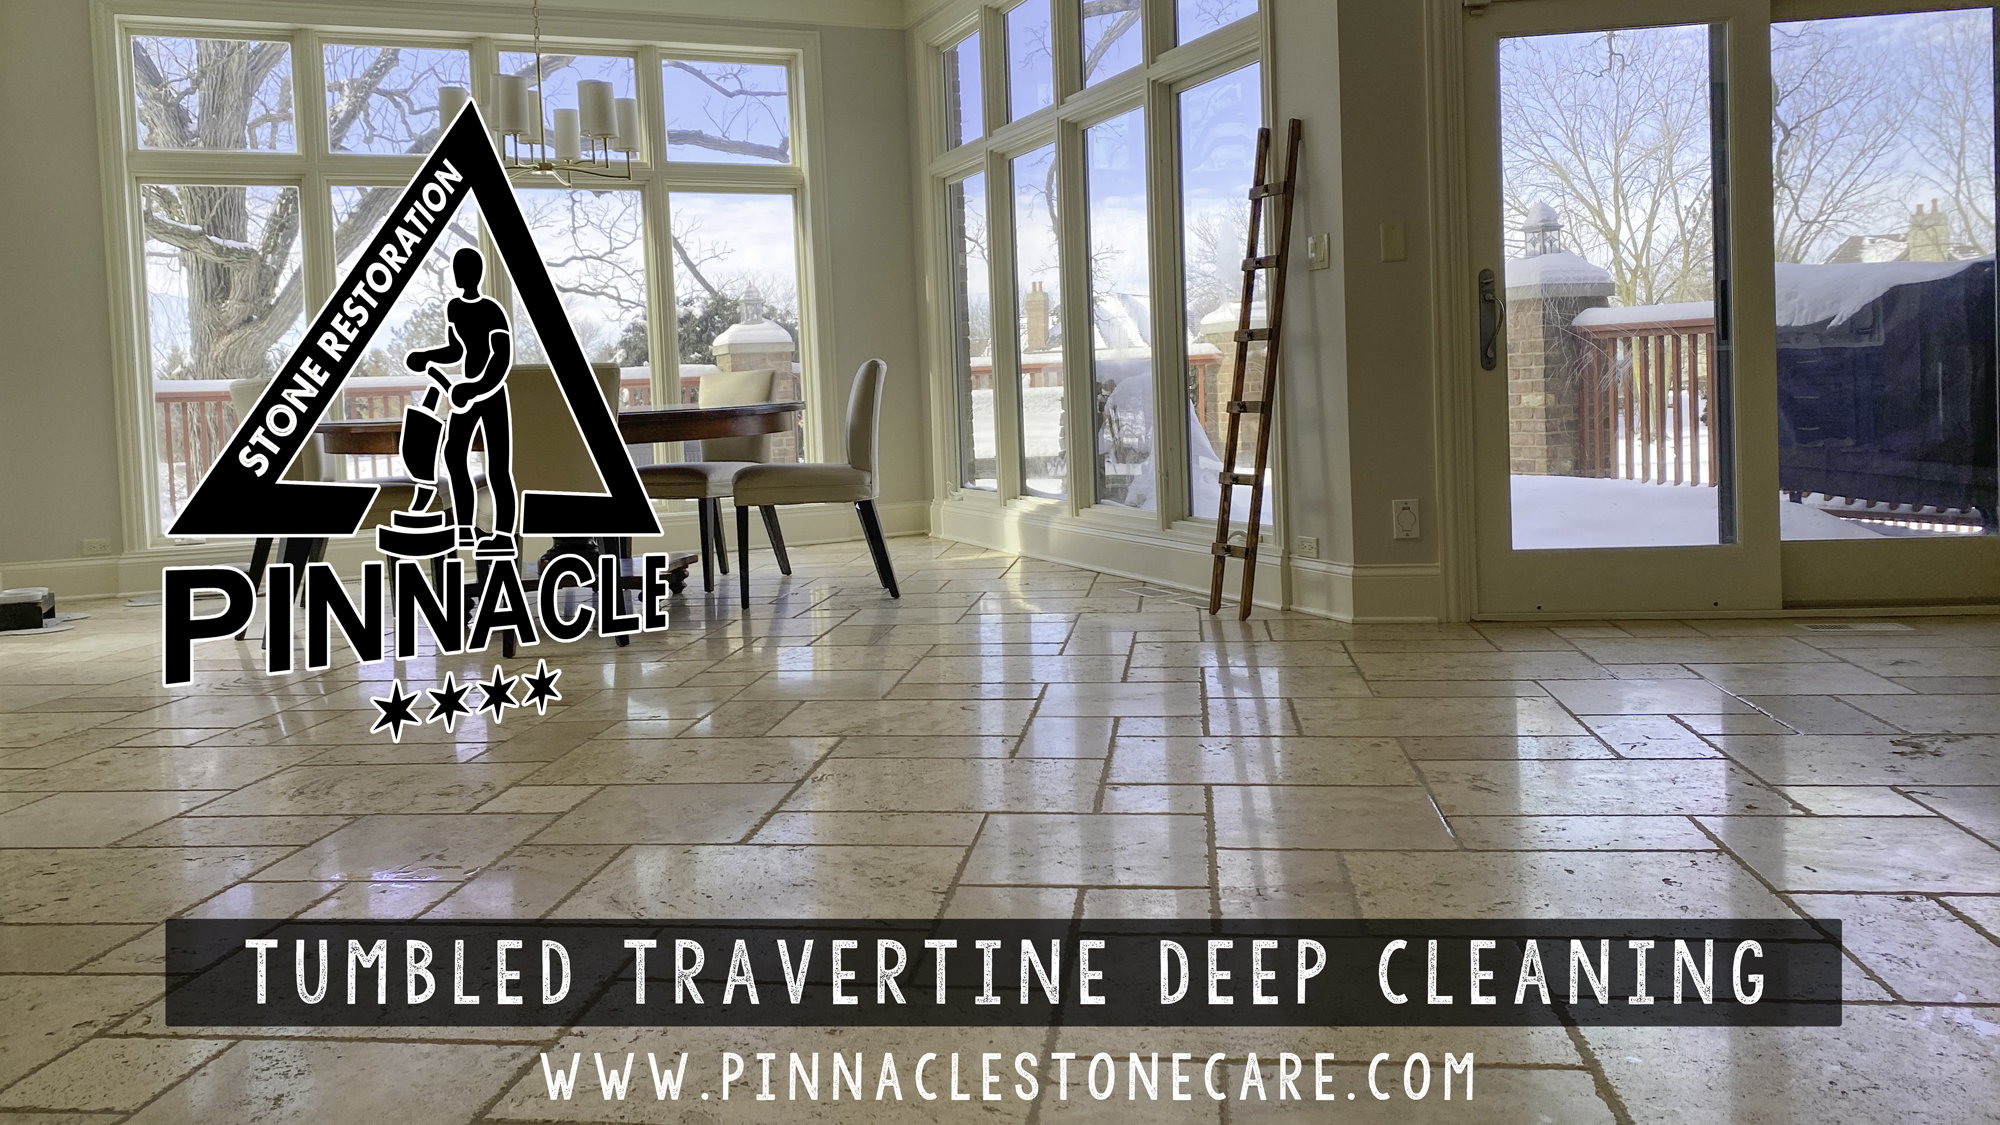 TUMBLED TRAVERTINE DEEP CLEANING